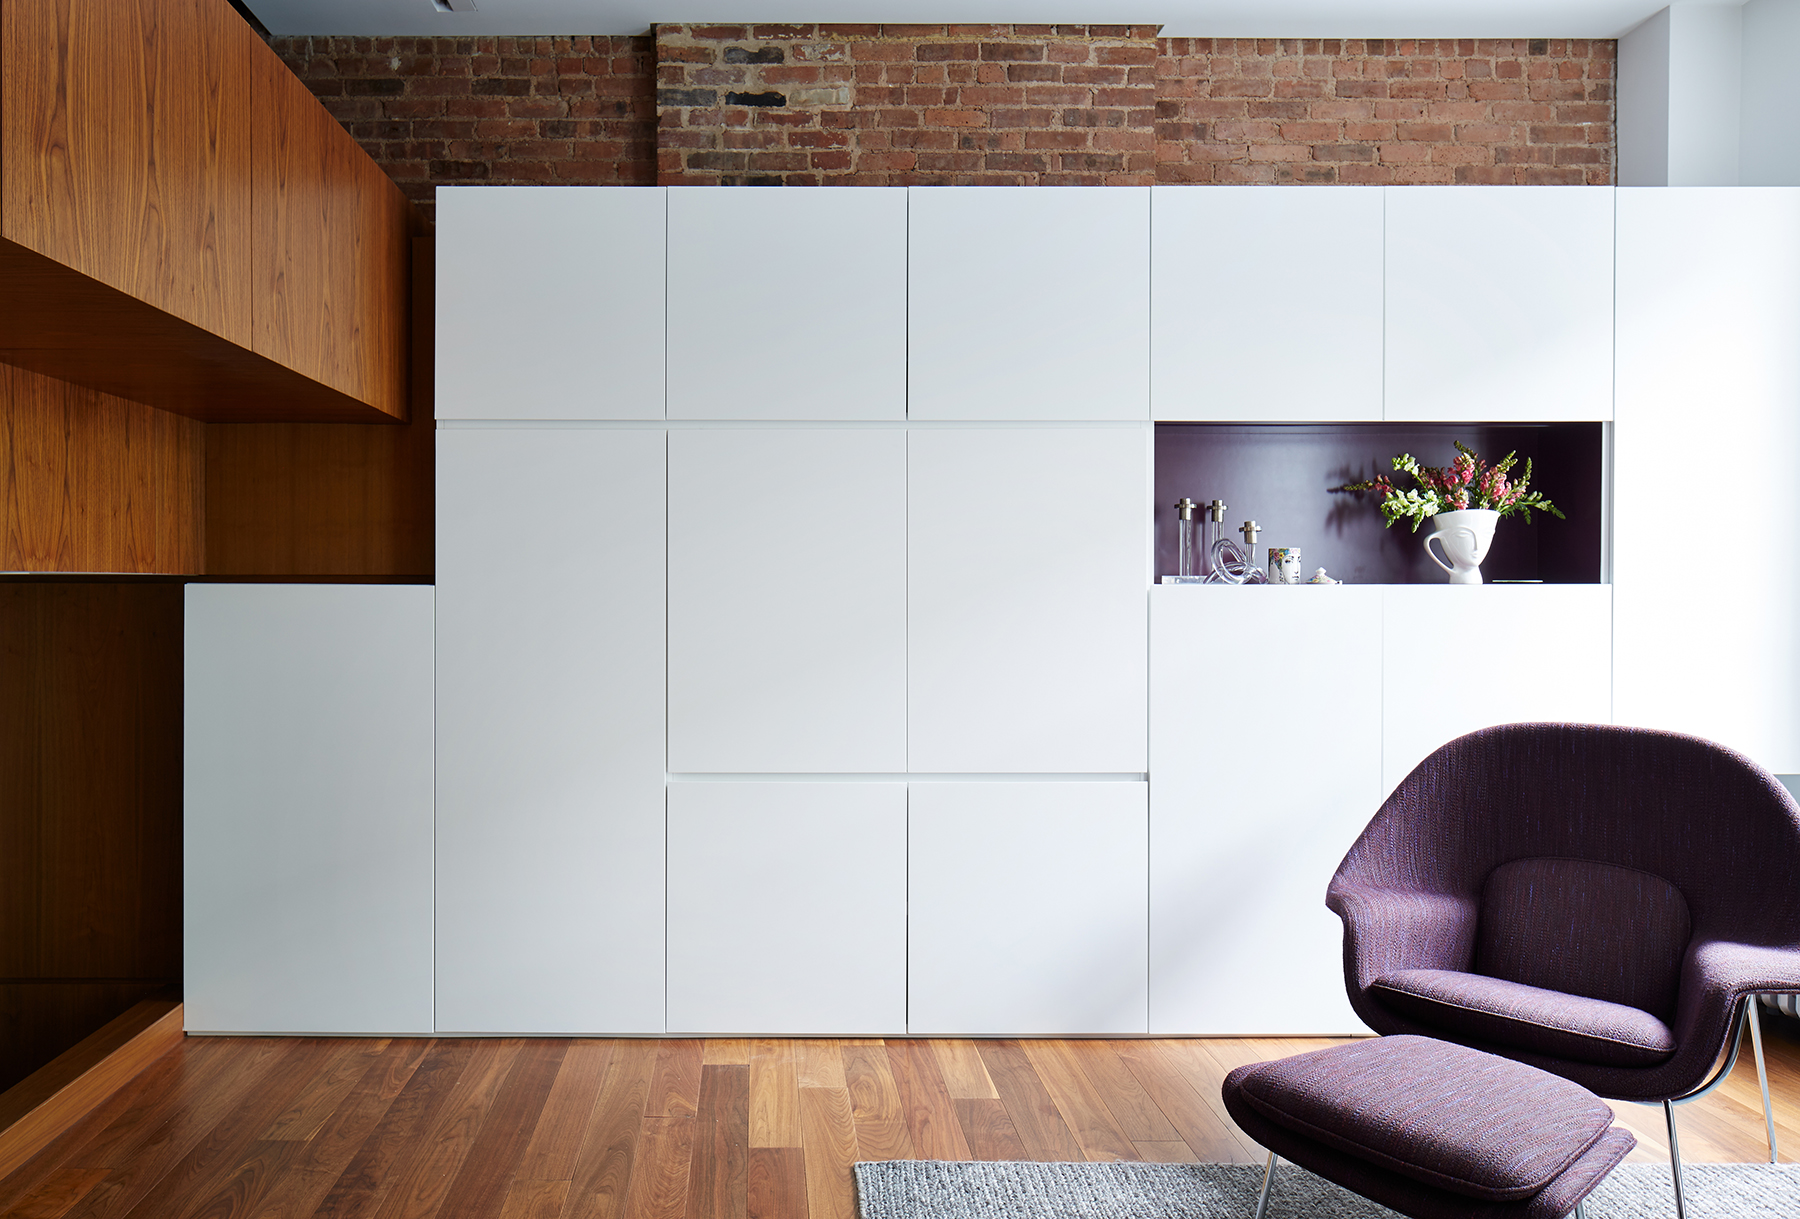 STADT Architecture, Loft, Plum, Womb Chair, Cabinetry, STADT, nyc architects, ny apartment renovation